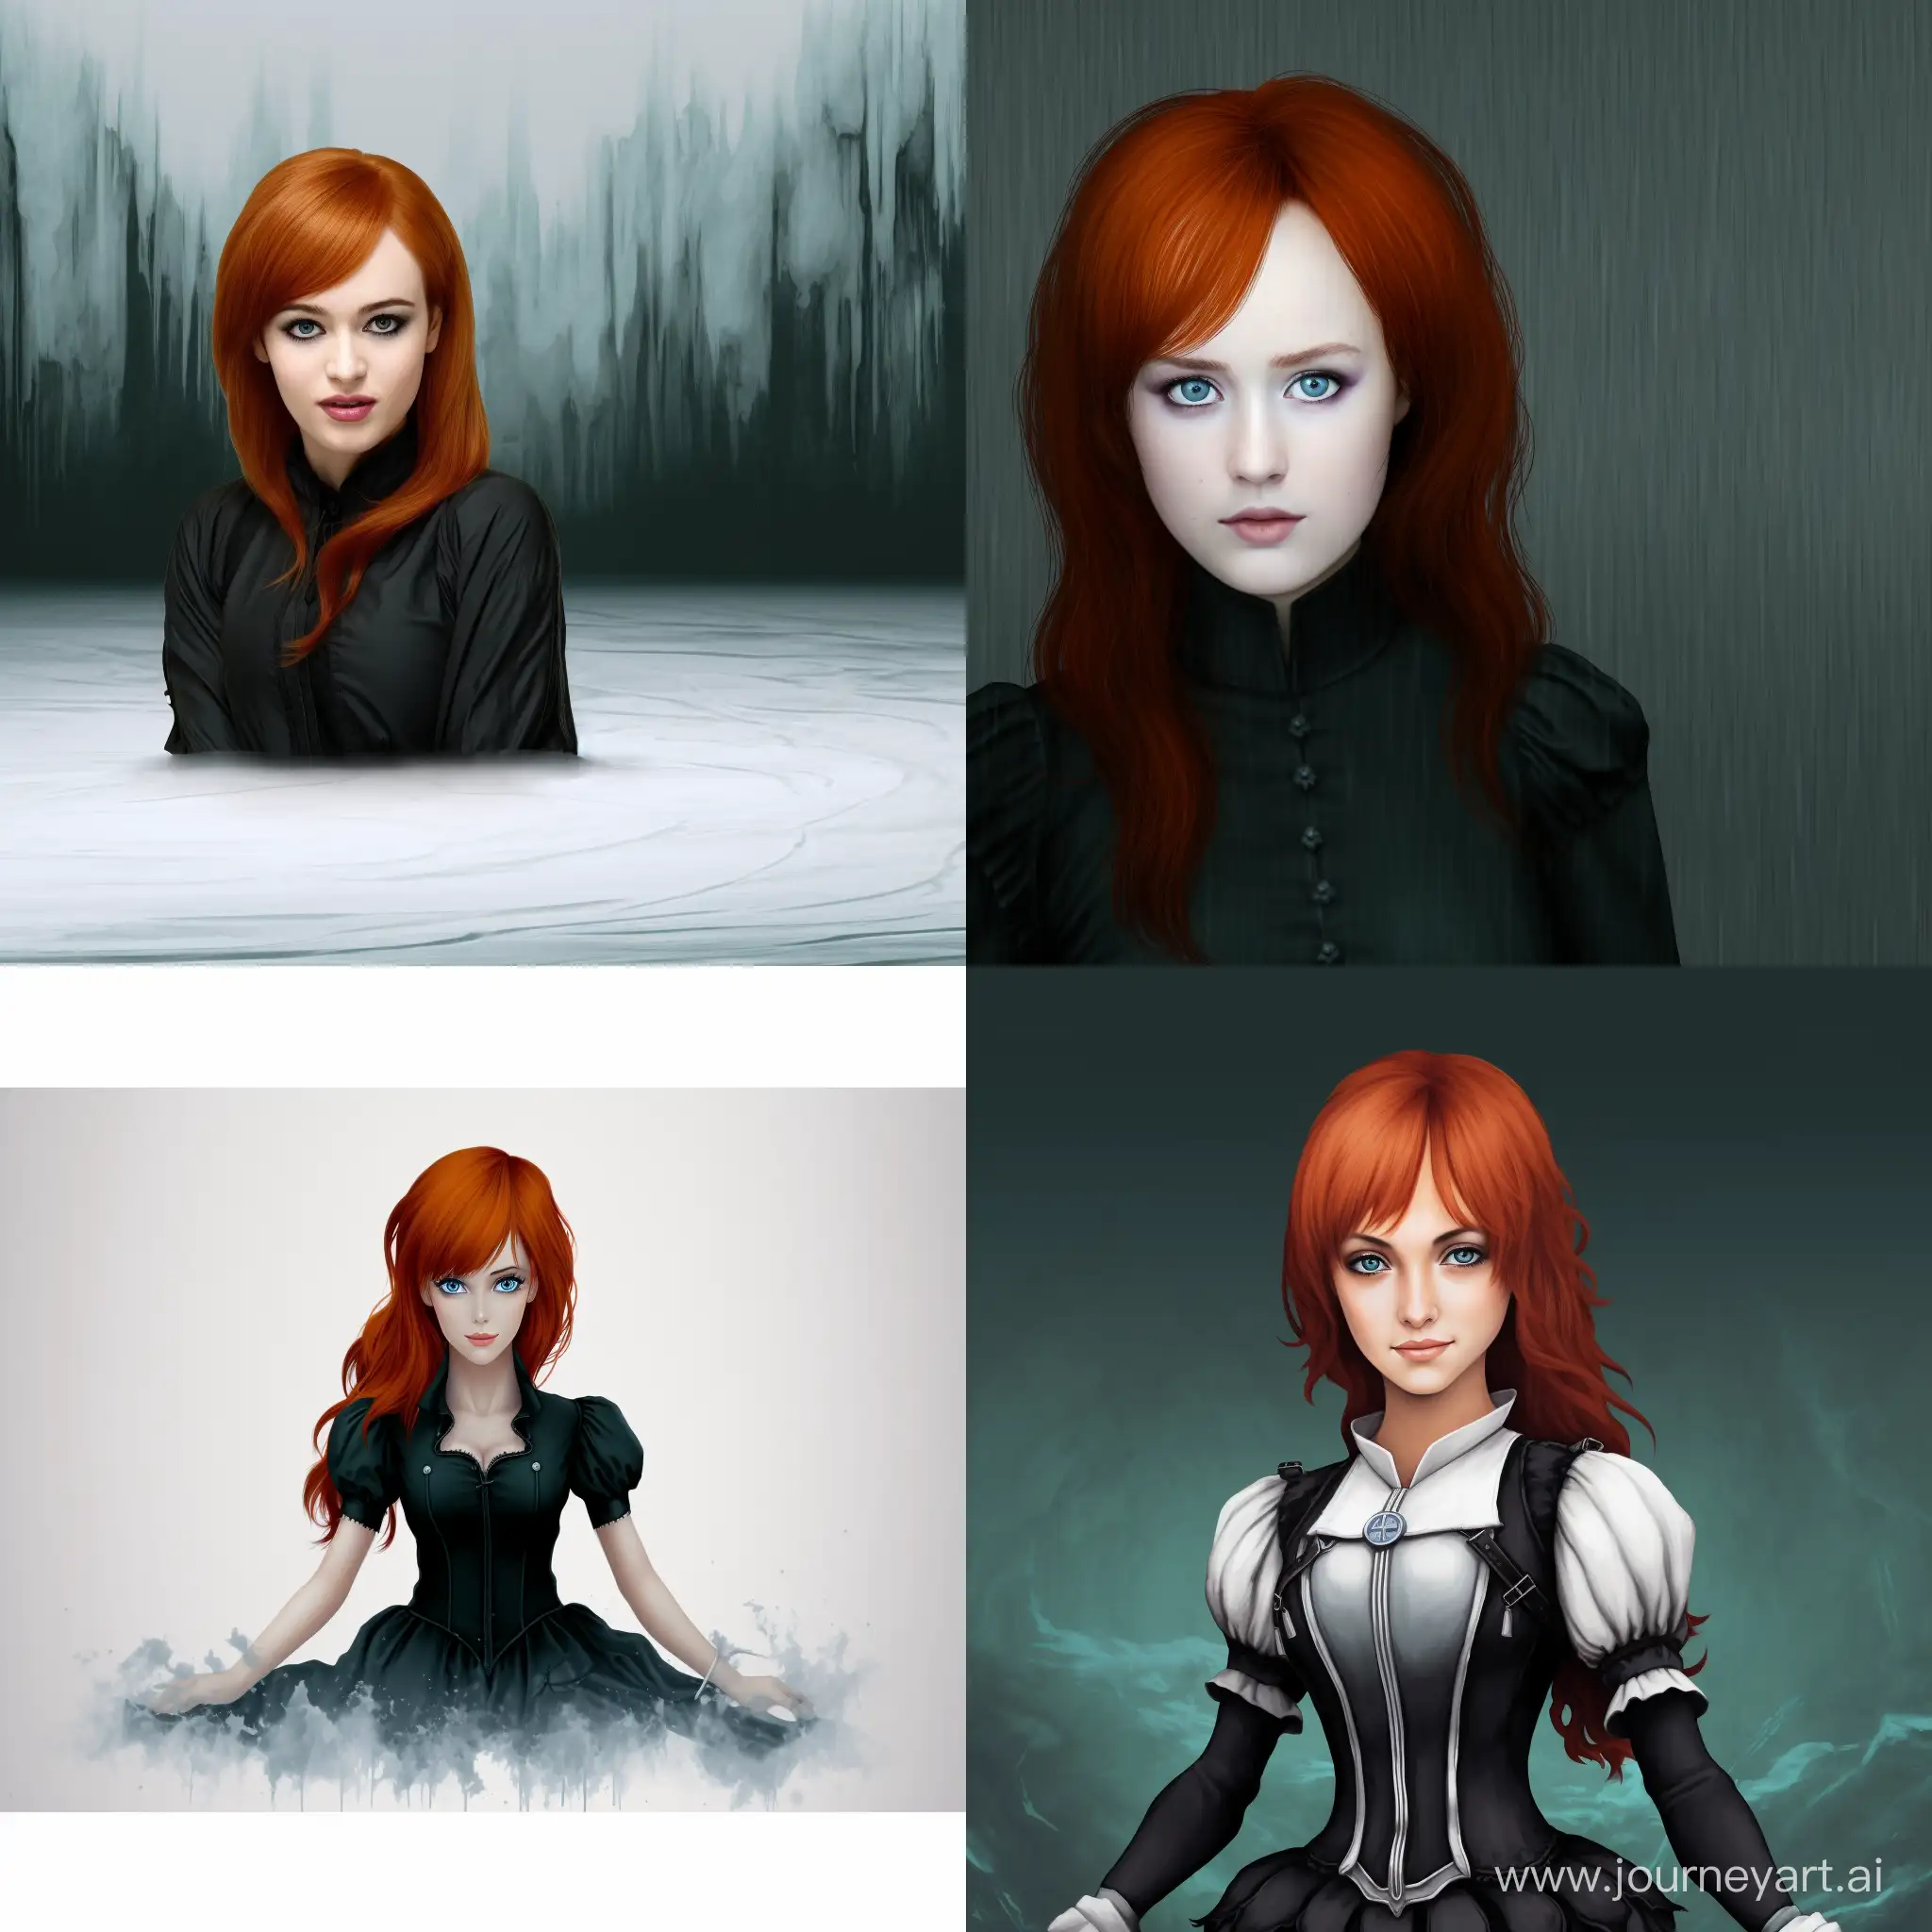 Dystopian-Fusion-RedHaired-Chinese-Protagonist-in-a-World-of-Water-Scarcity-and-Union